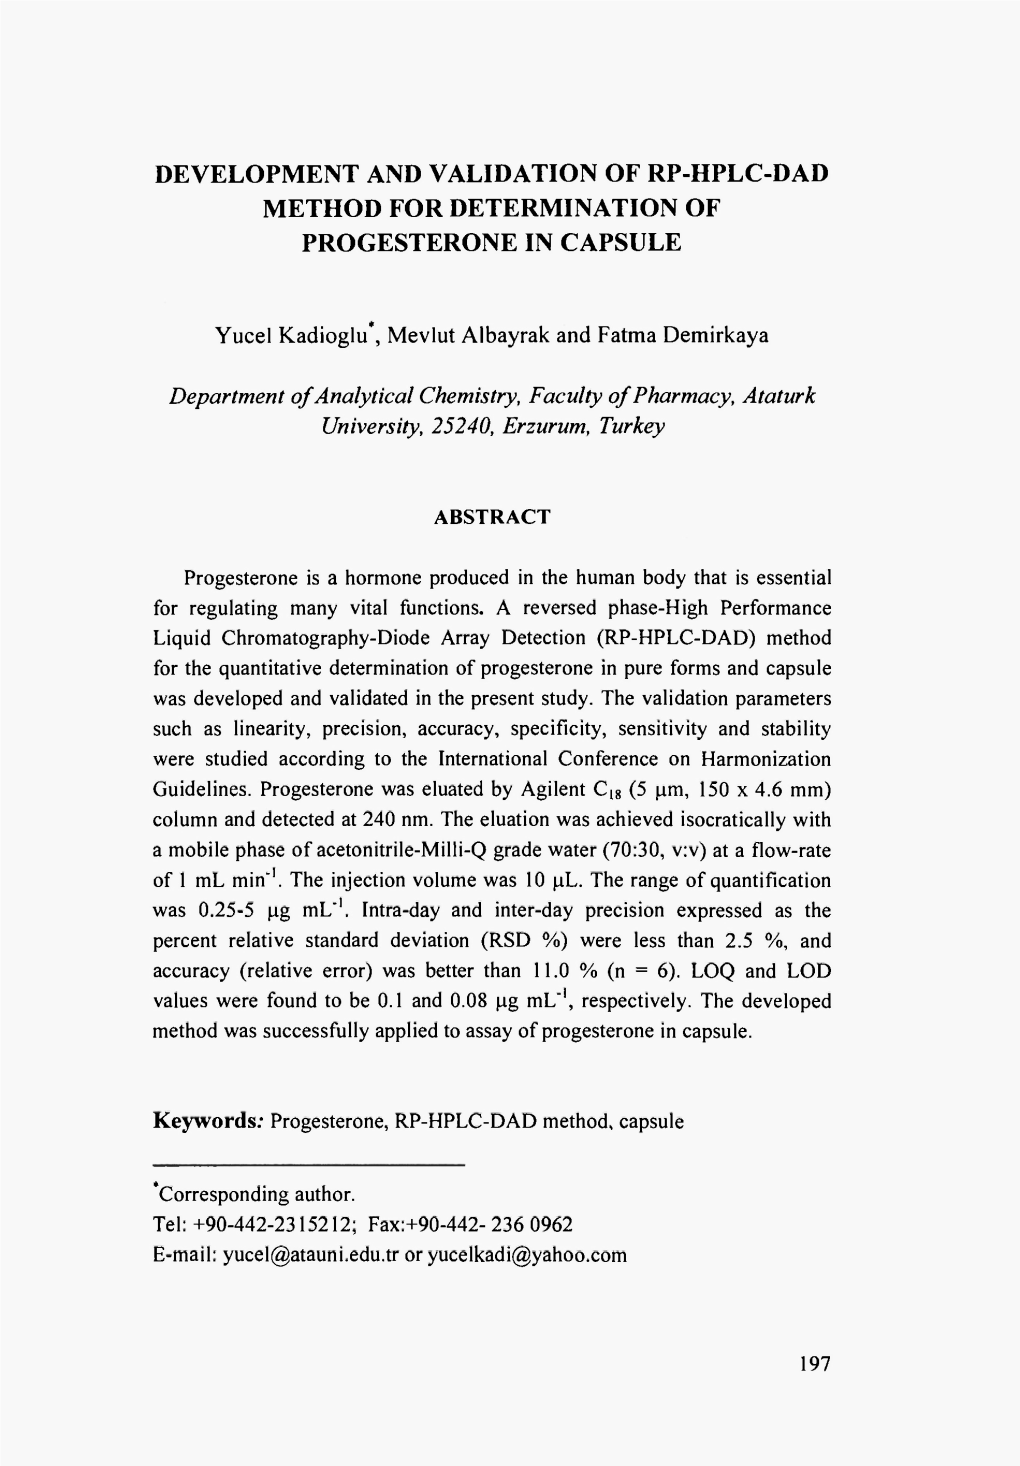 Development and Validation of Rp-Hplc-Dad Method for Determination of Progesterone in Capsule